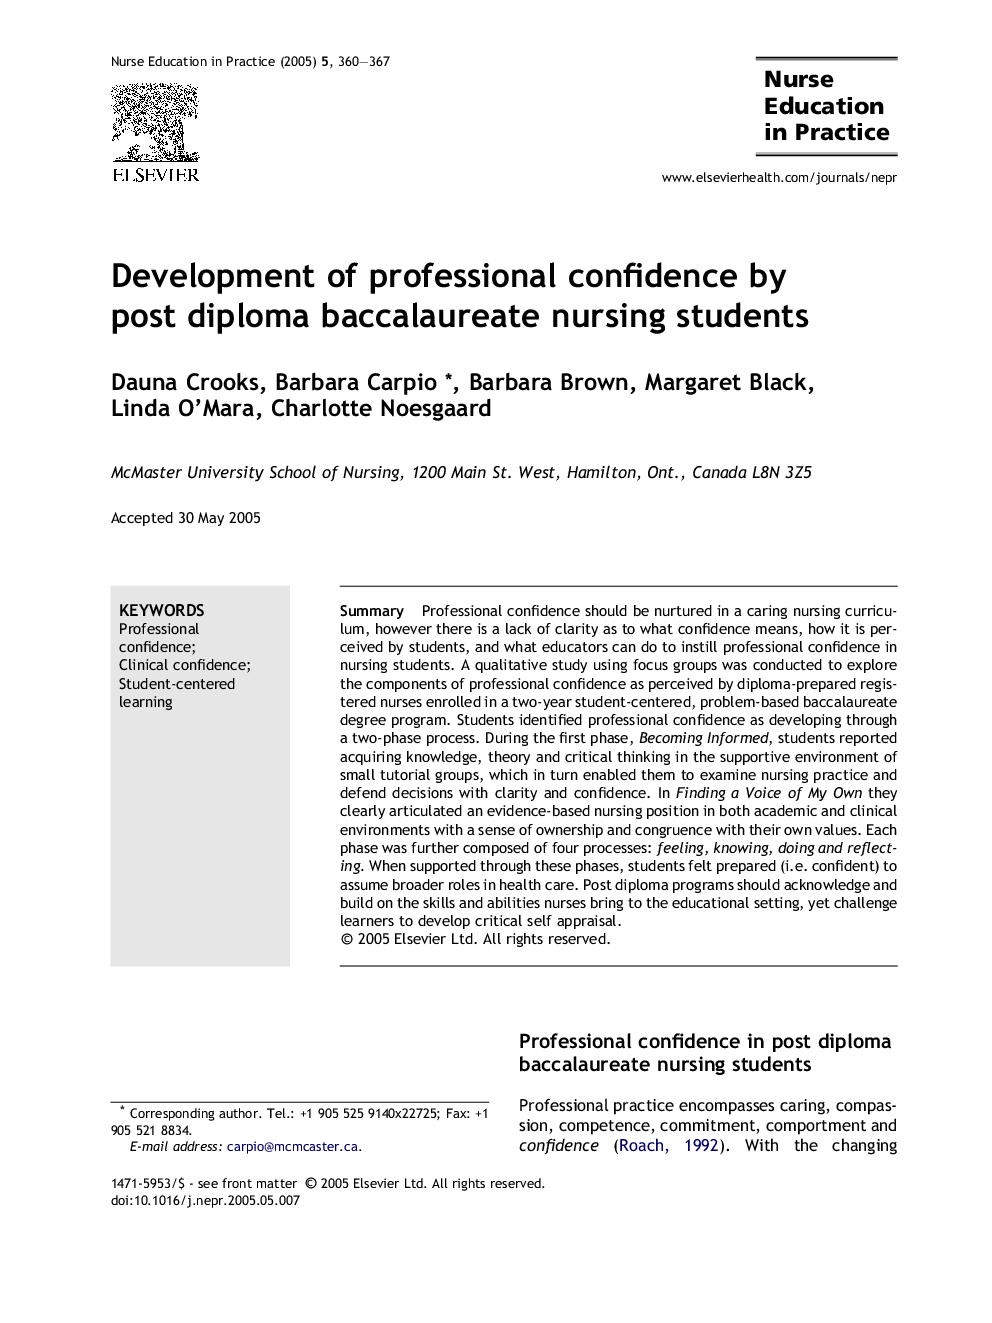 Development of professional confidence by post diploma baccalaureate nursing students